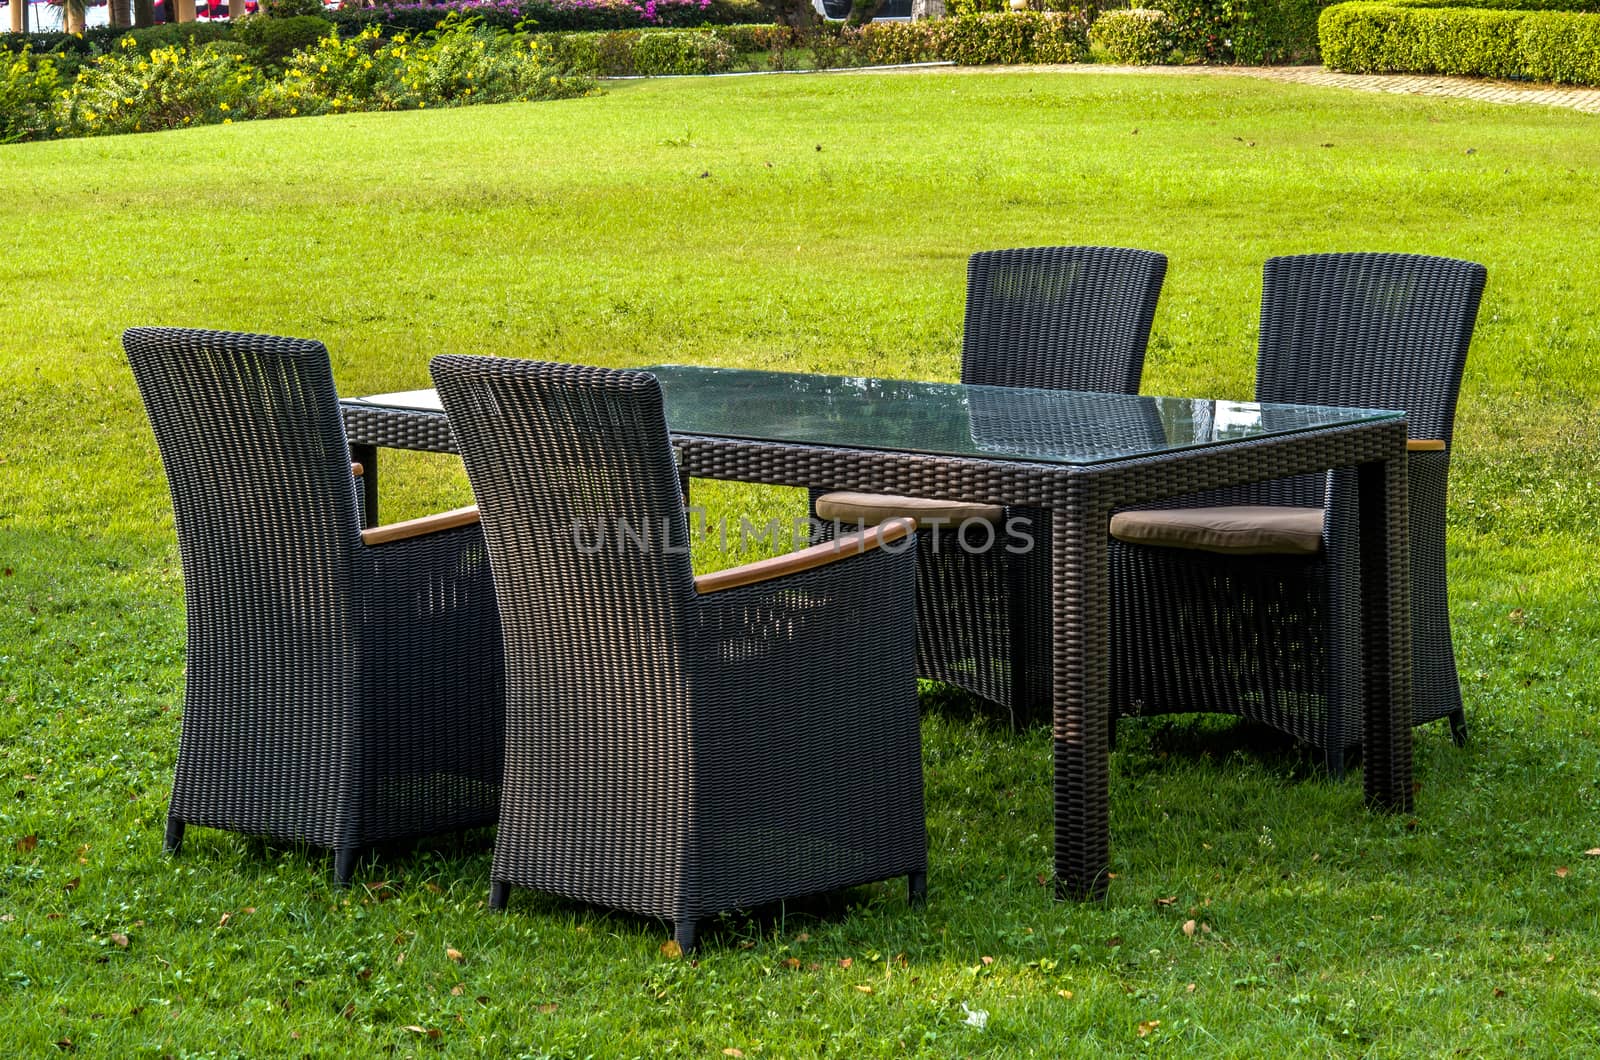 Rattan furniture, table, chairs and cushion outdoors in the garden